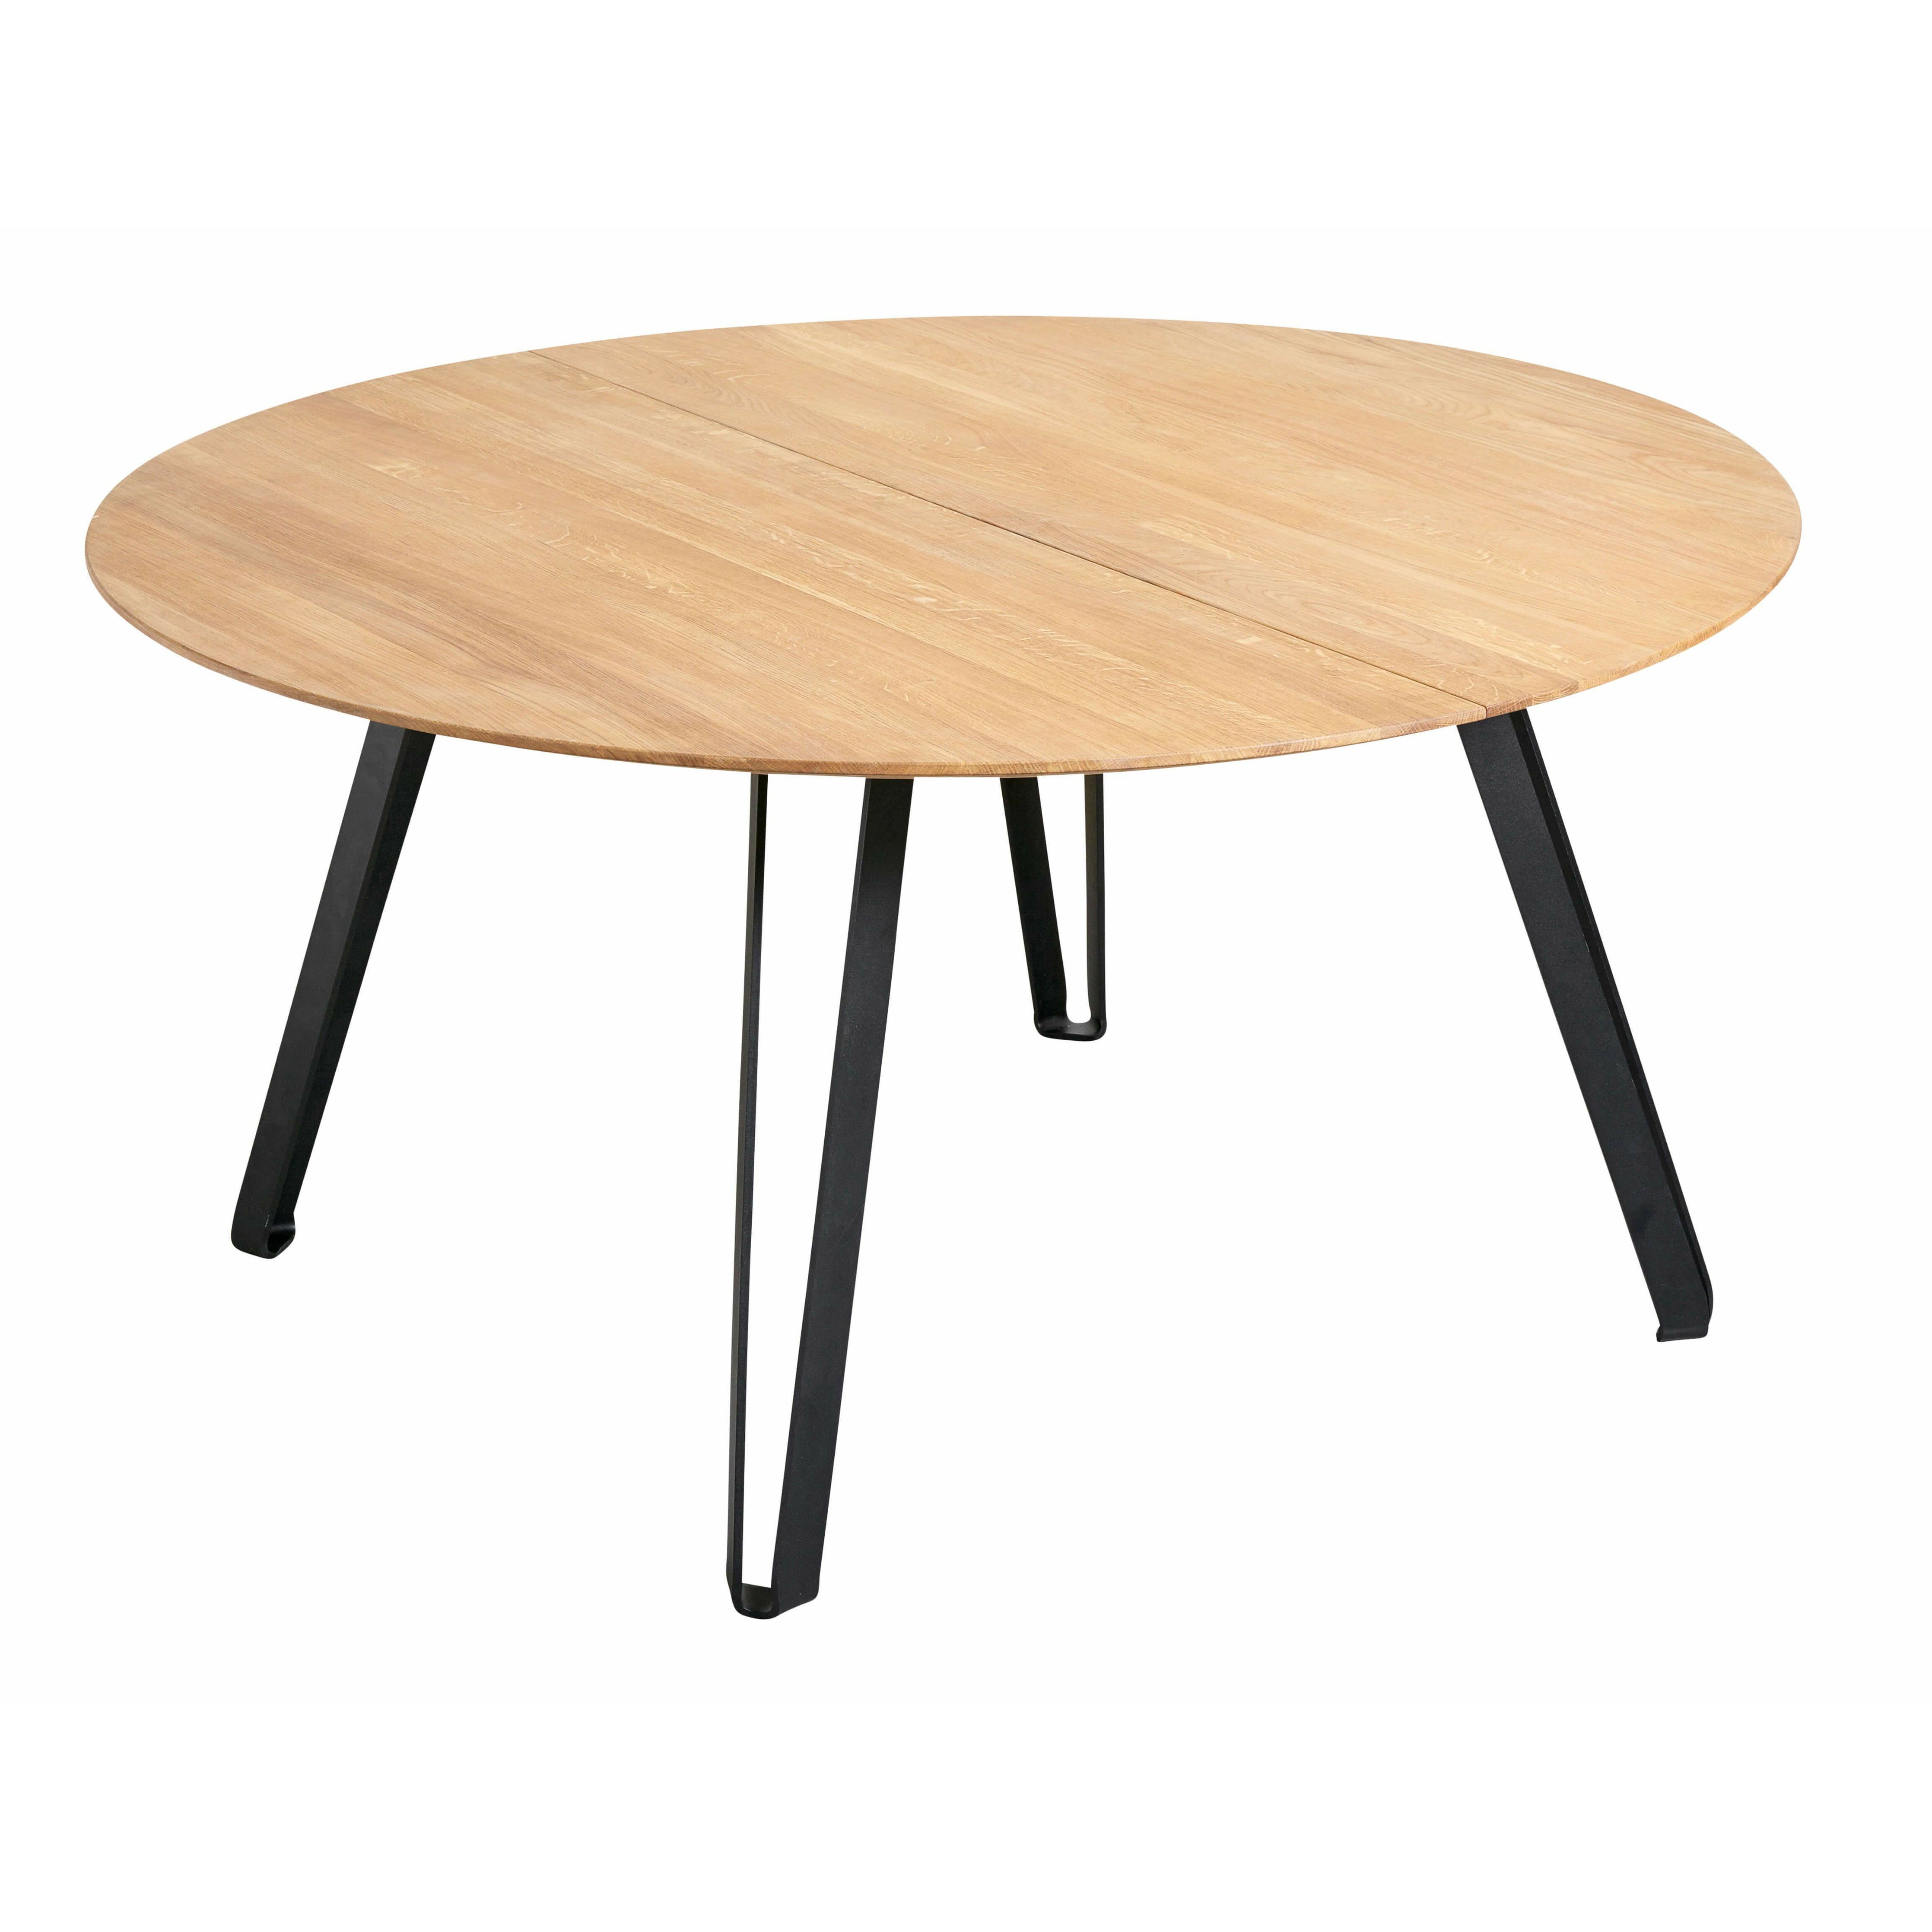 Muubs Space Eetting Table Round Oak, 150 cm